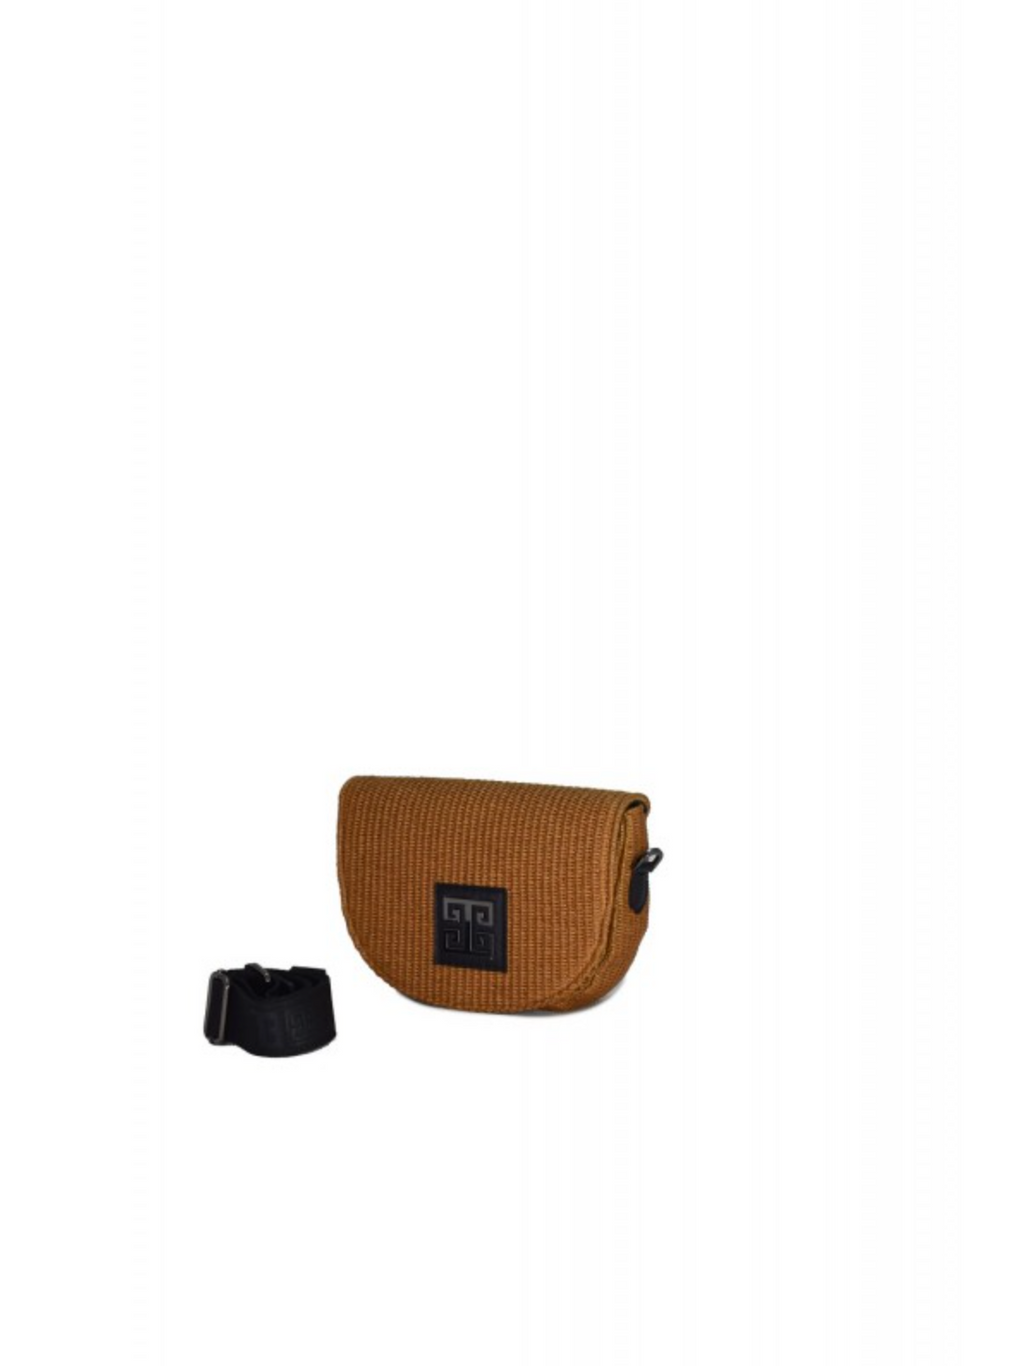 Ivy Crossbody Bag in Exclusive Natural - Black Strap